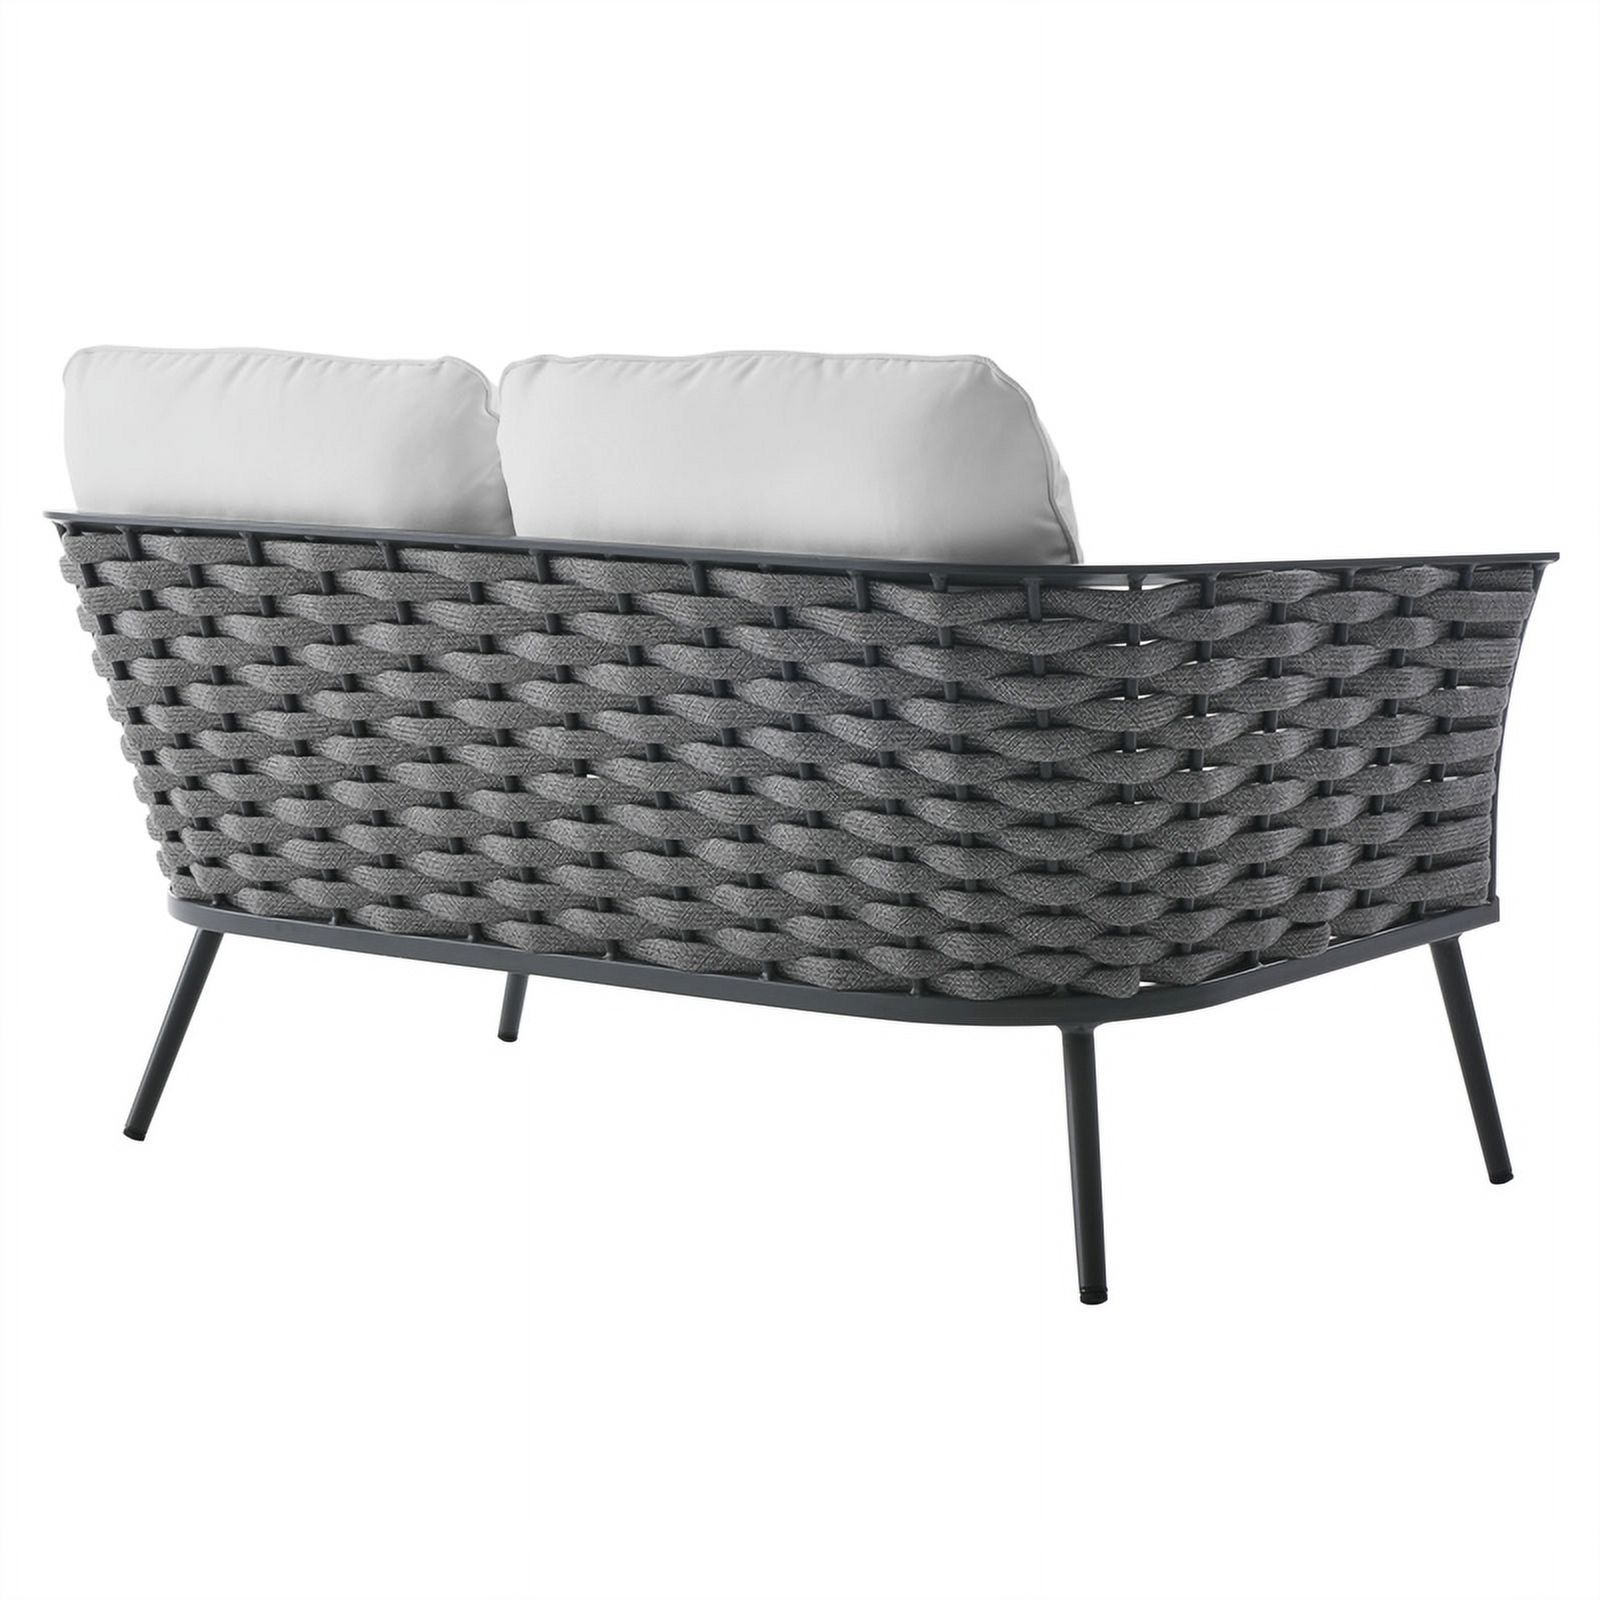 Modway Stance Aluminum & Fabric Patio Loveseat in Gra & White - image 4 of 8